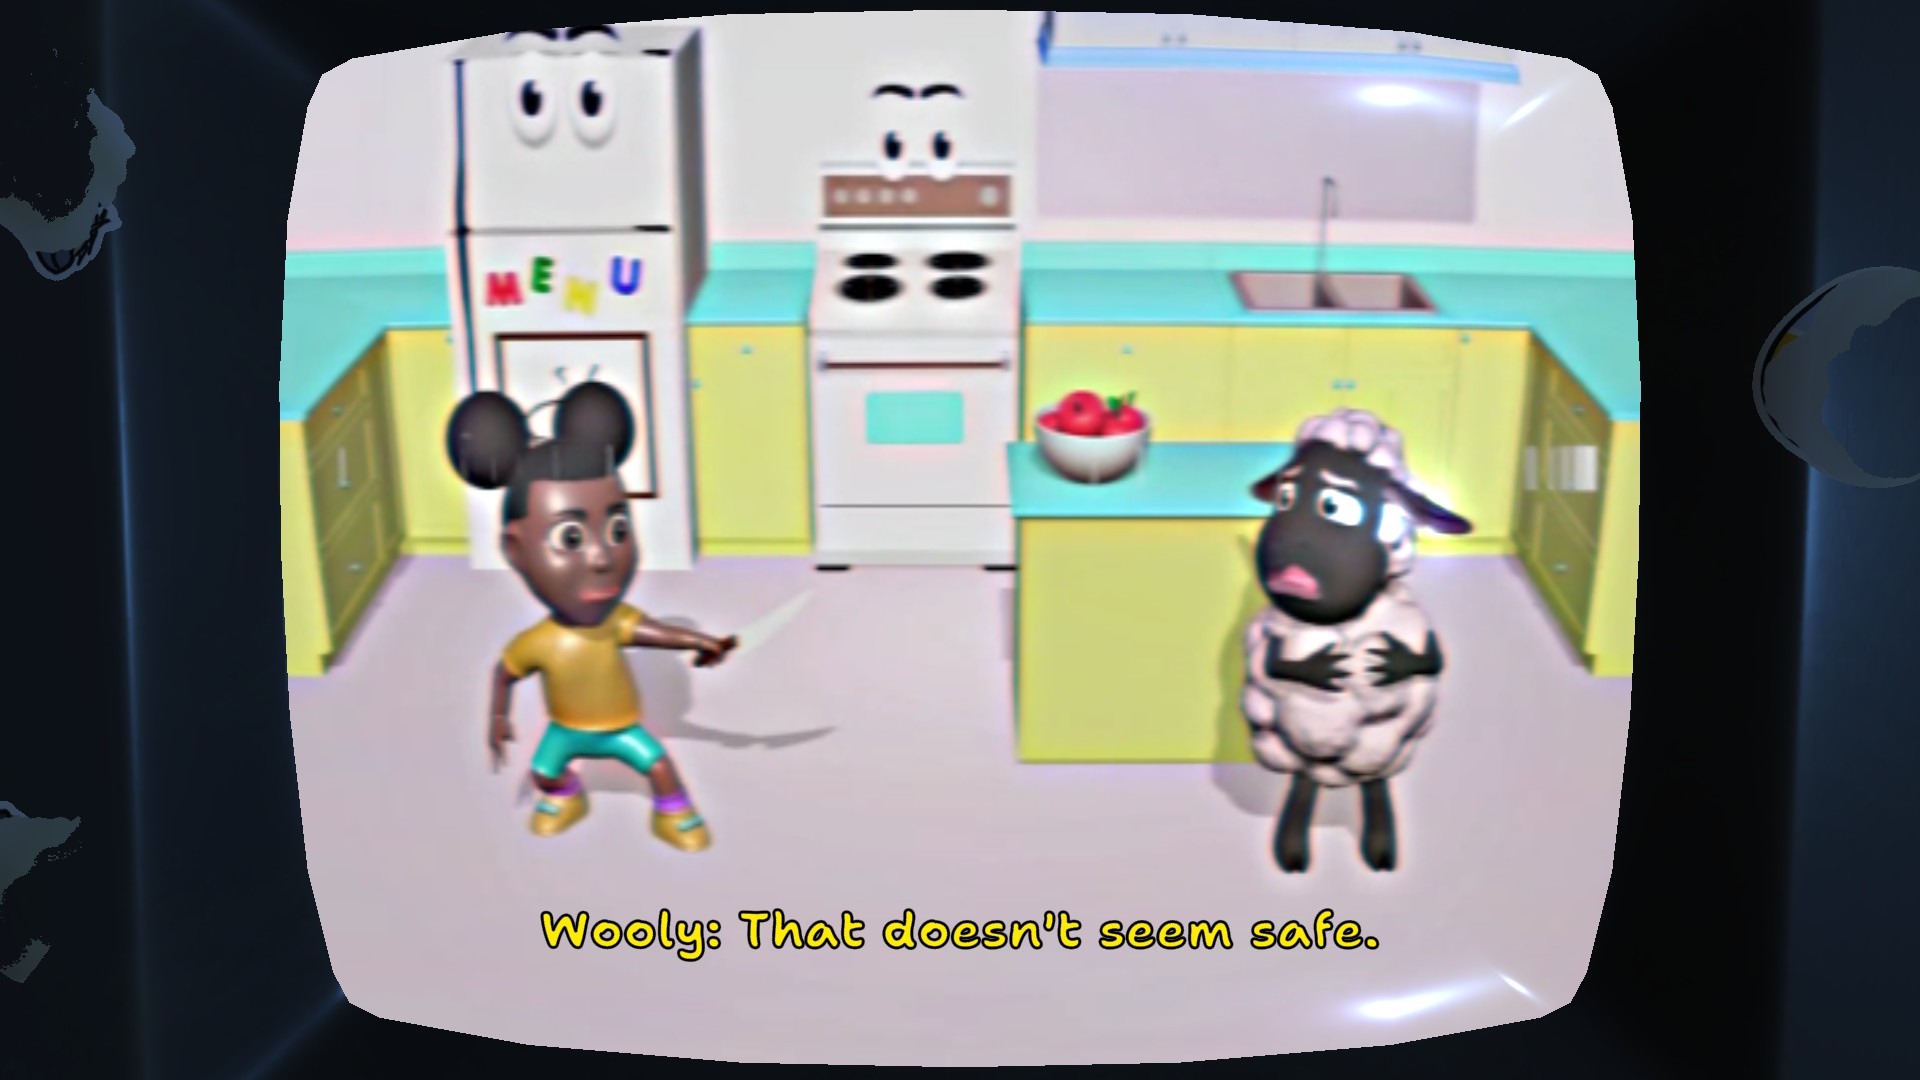 Game screenshot showing a CRT TV screen with a CGI TV show playing on it. The show features two CGI characters, one little girl, one anthropmorphic sheep, and the little girl is holding a knife. The subtitles read: "Wooly: That doesn't seem safe!"